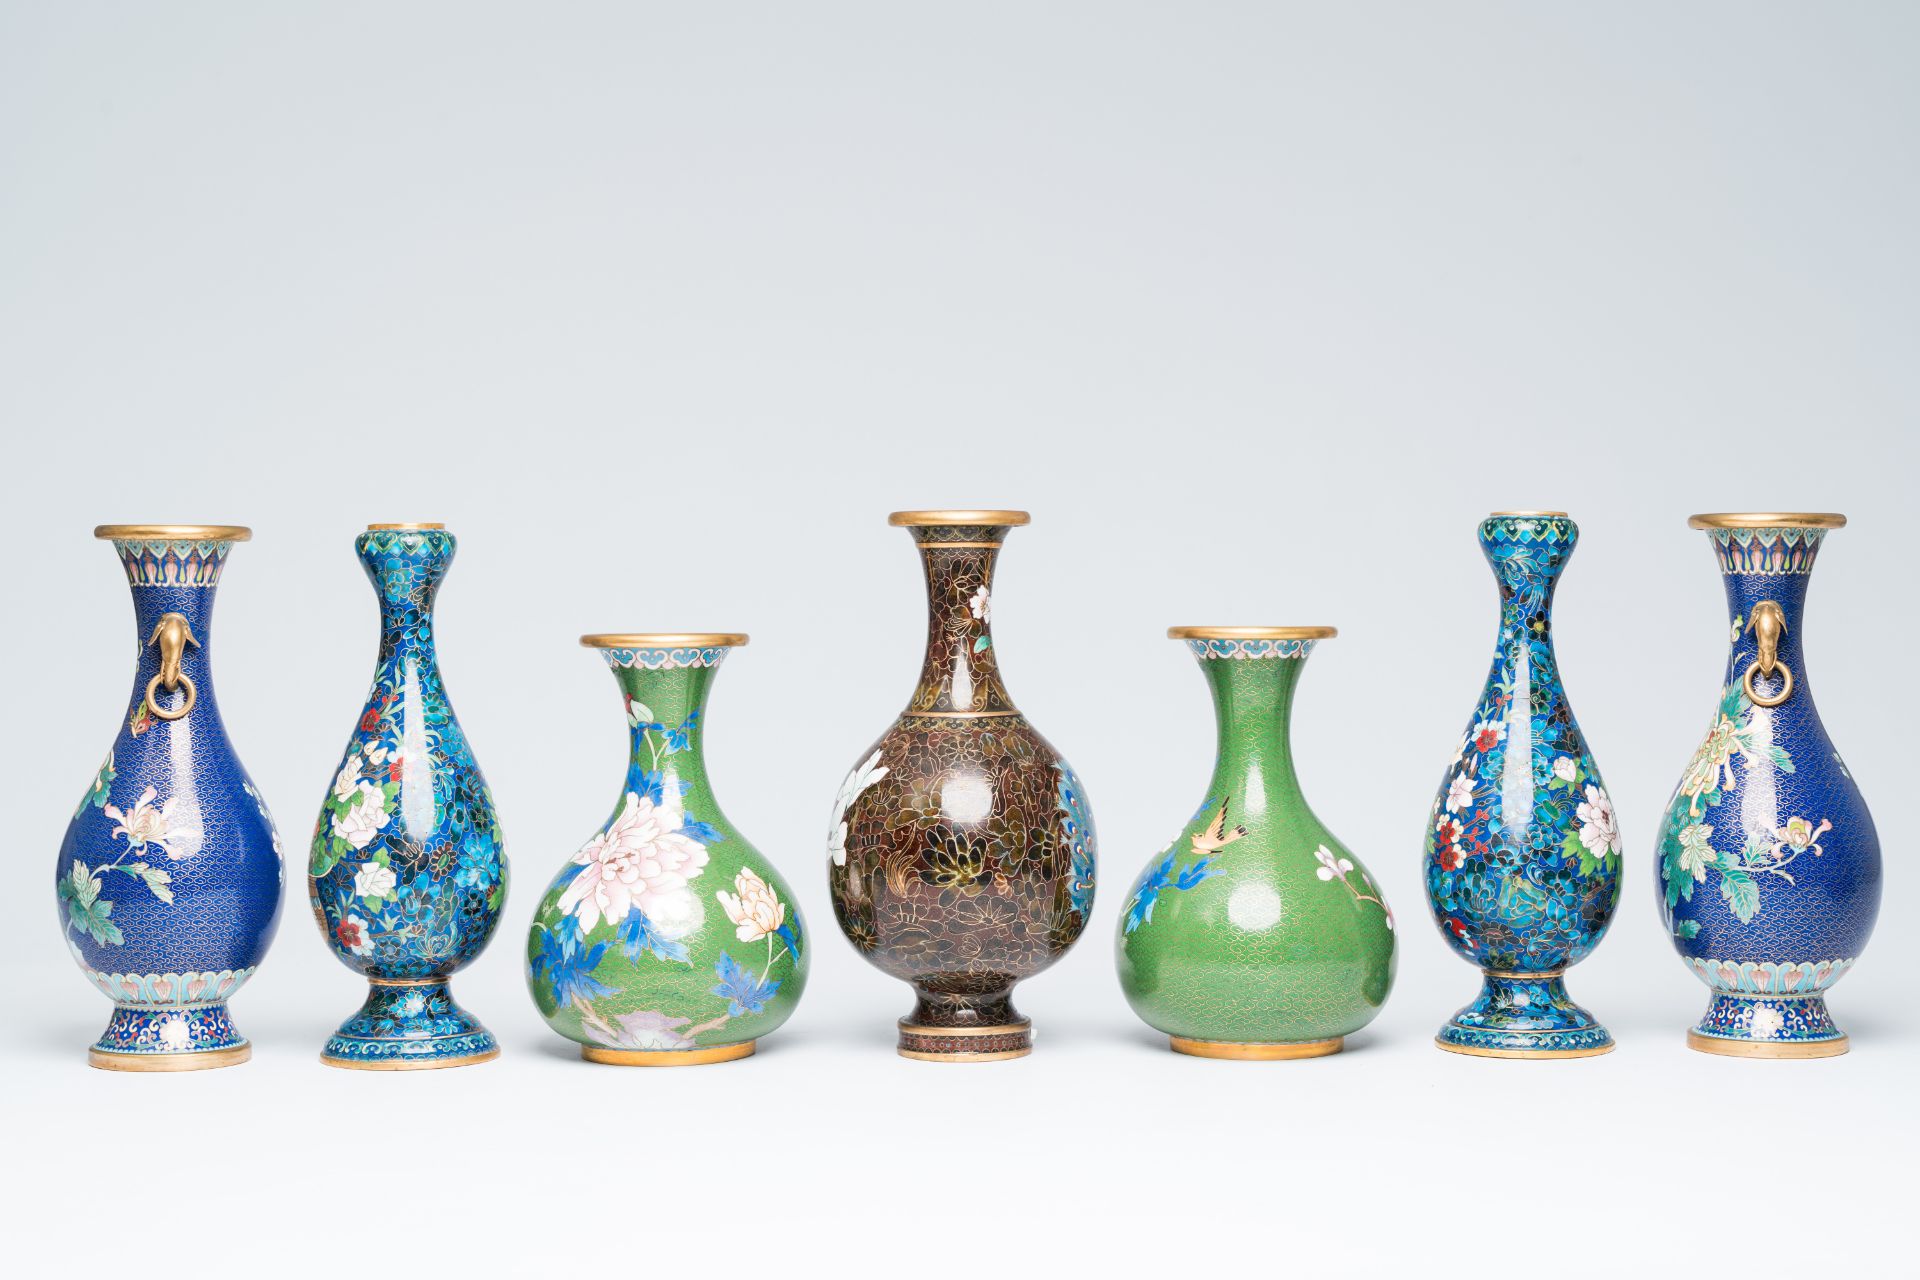 Three pairs of Chinese cloisonne vases with floral design and a 'proud peacock' vase, 20th C. - Image 3 of 9